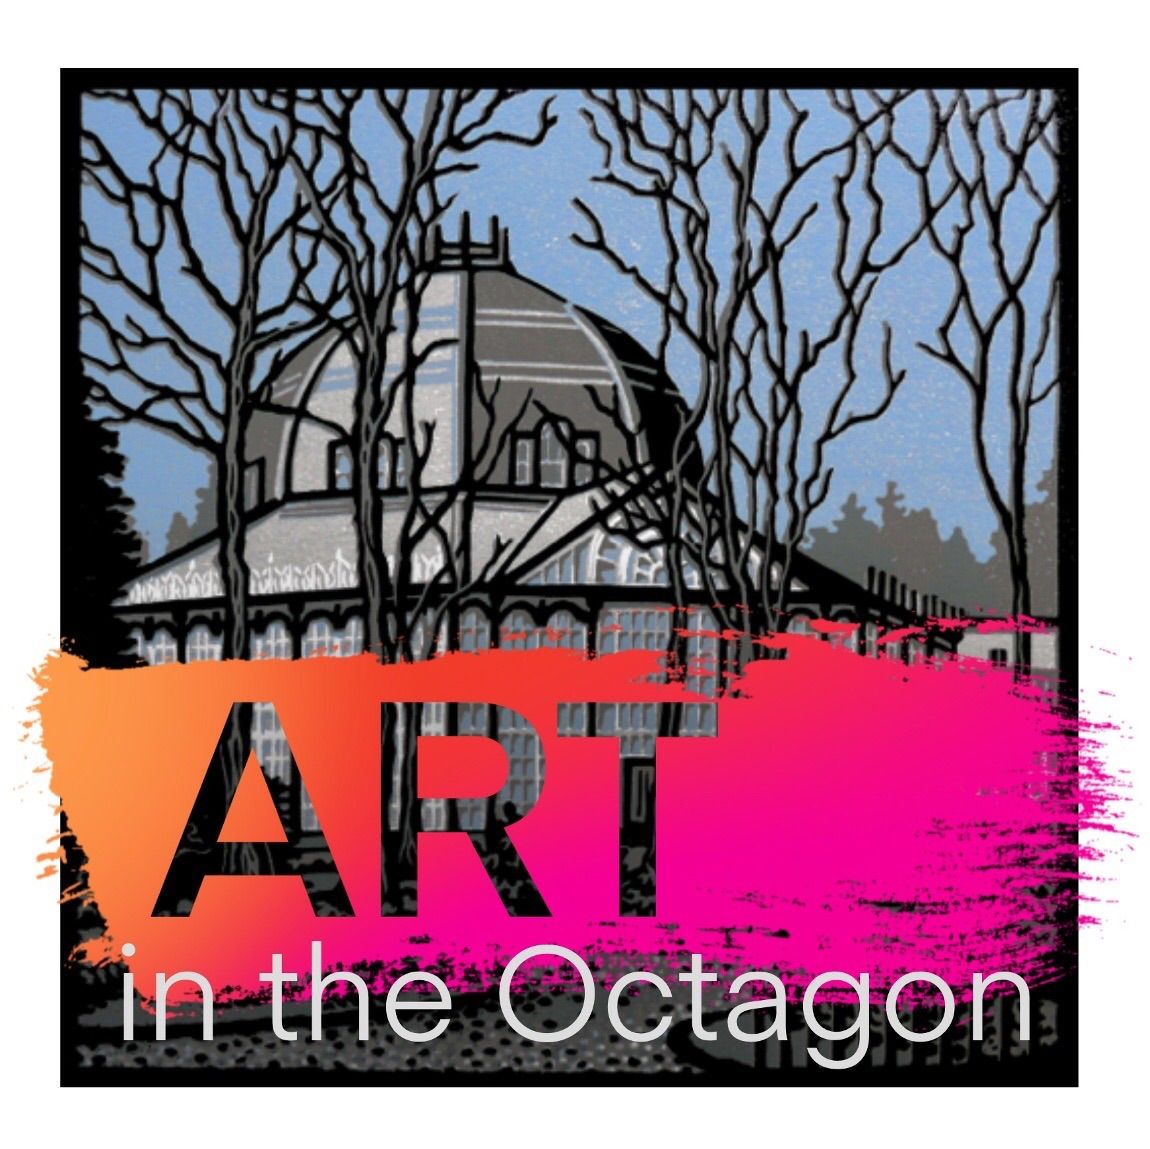 Art in the Octagon